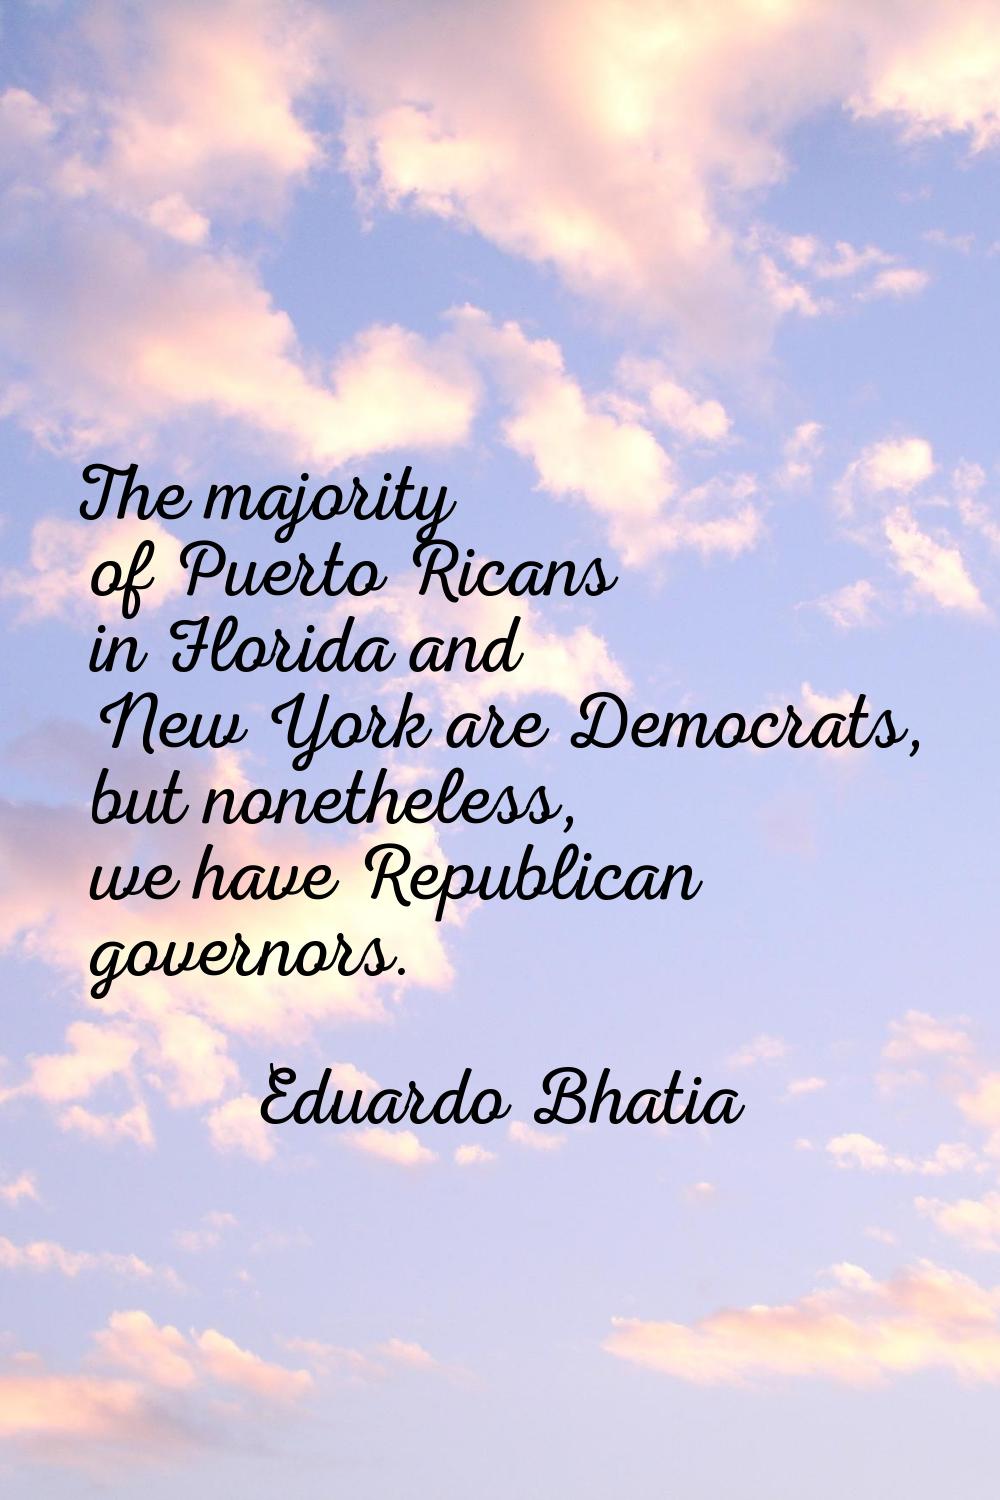 The majority of Puerto Ricans in Florida and New York are Democrats, but nonetheless, we have Repub